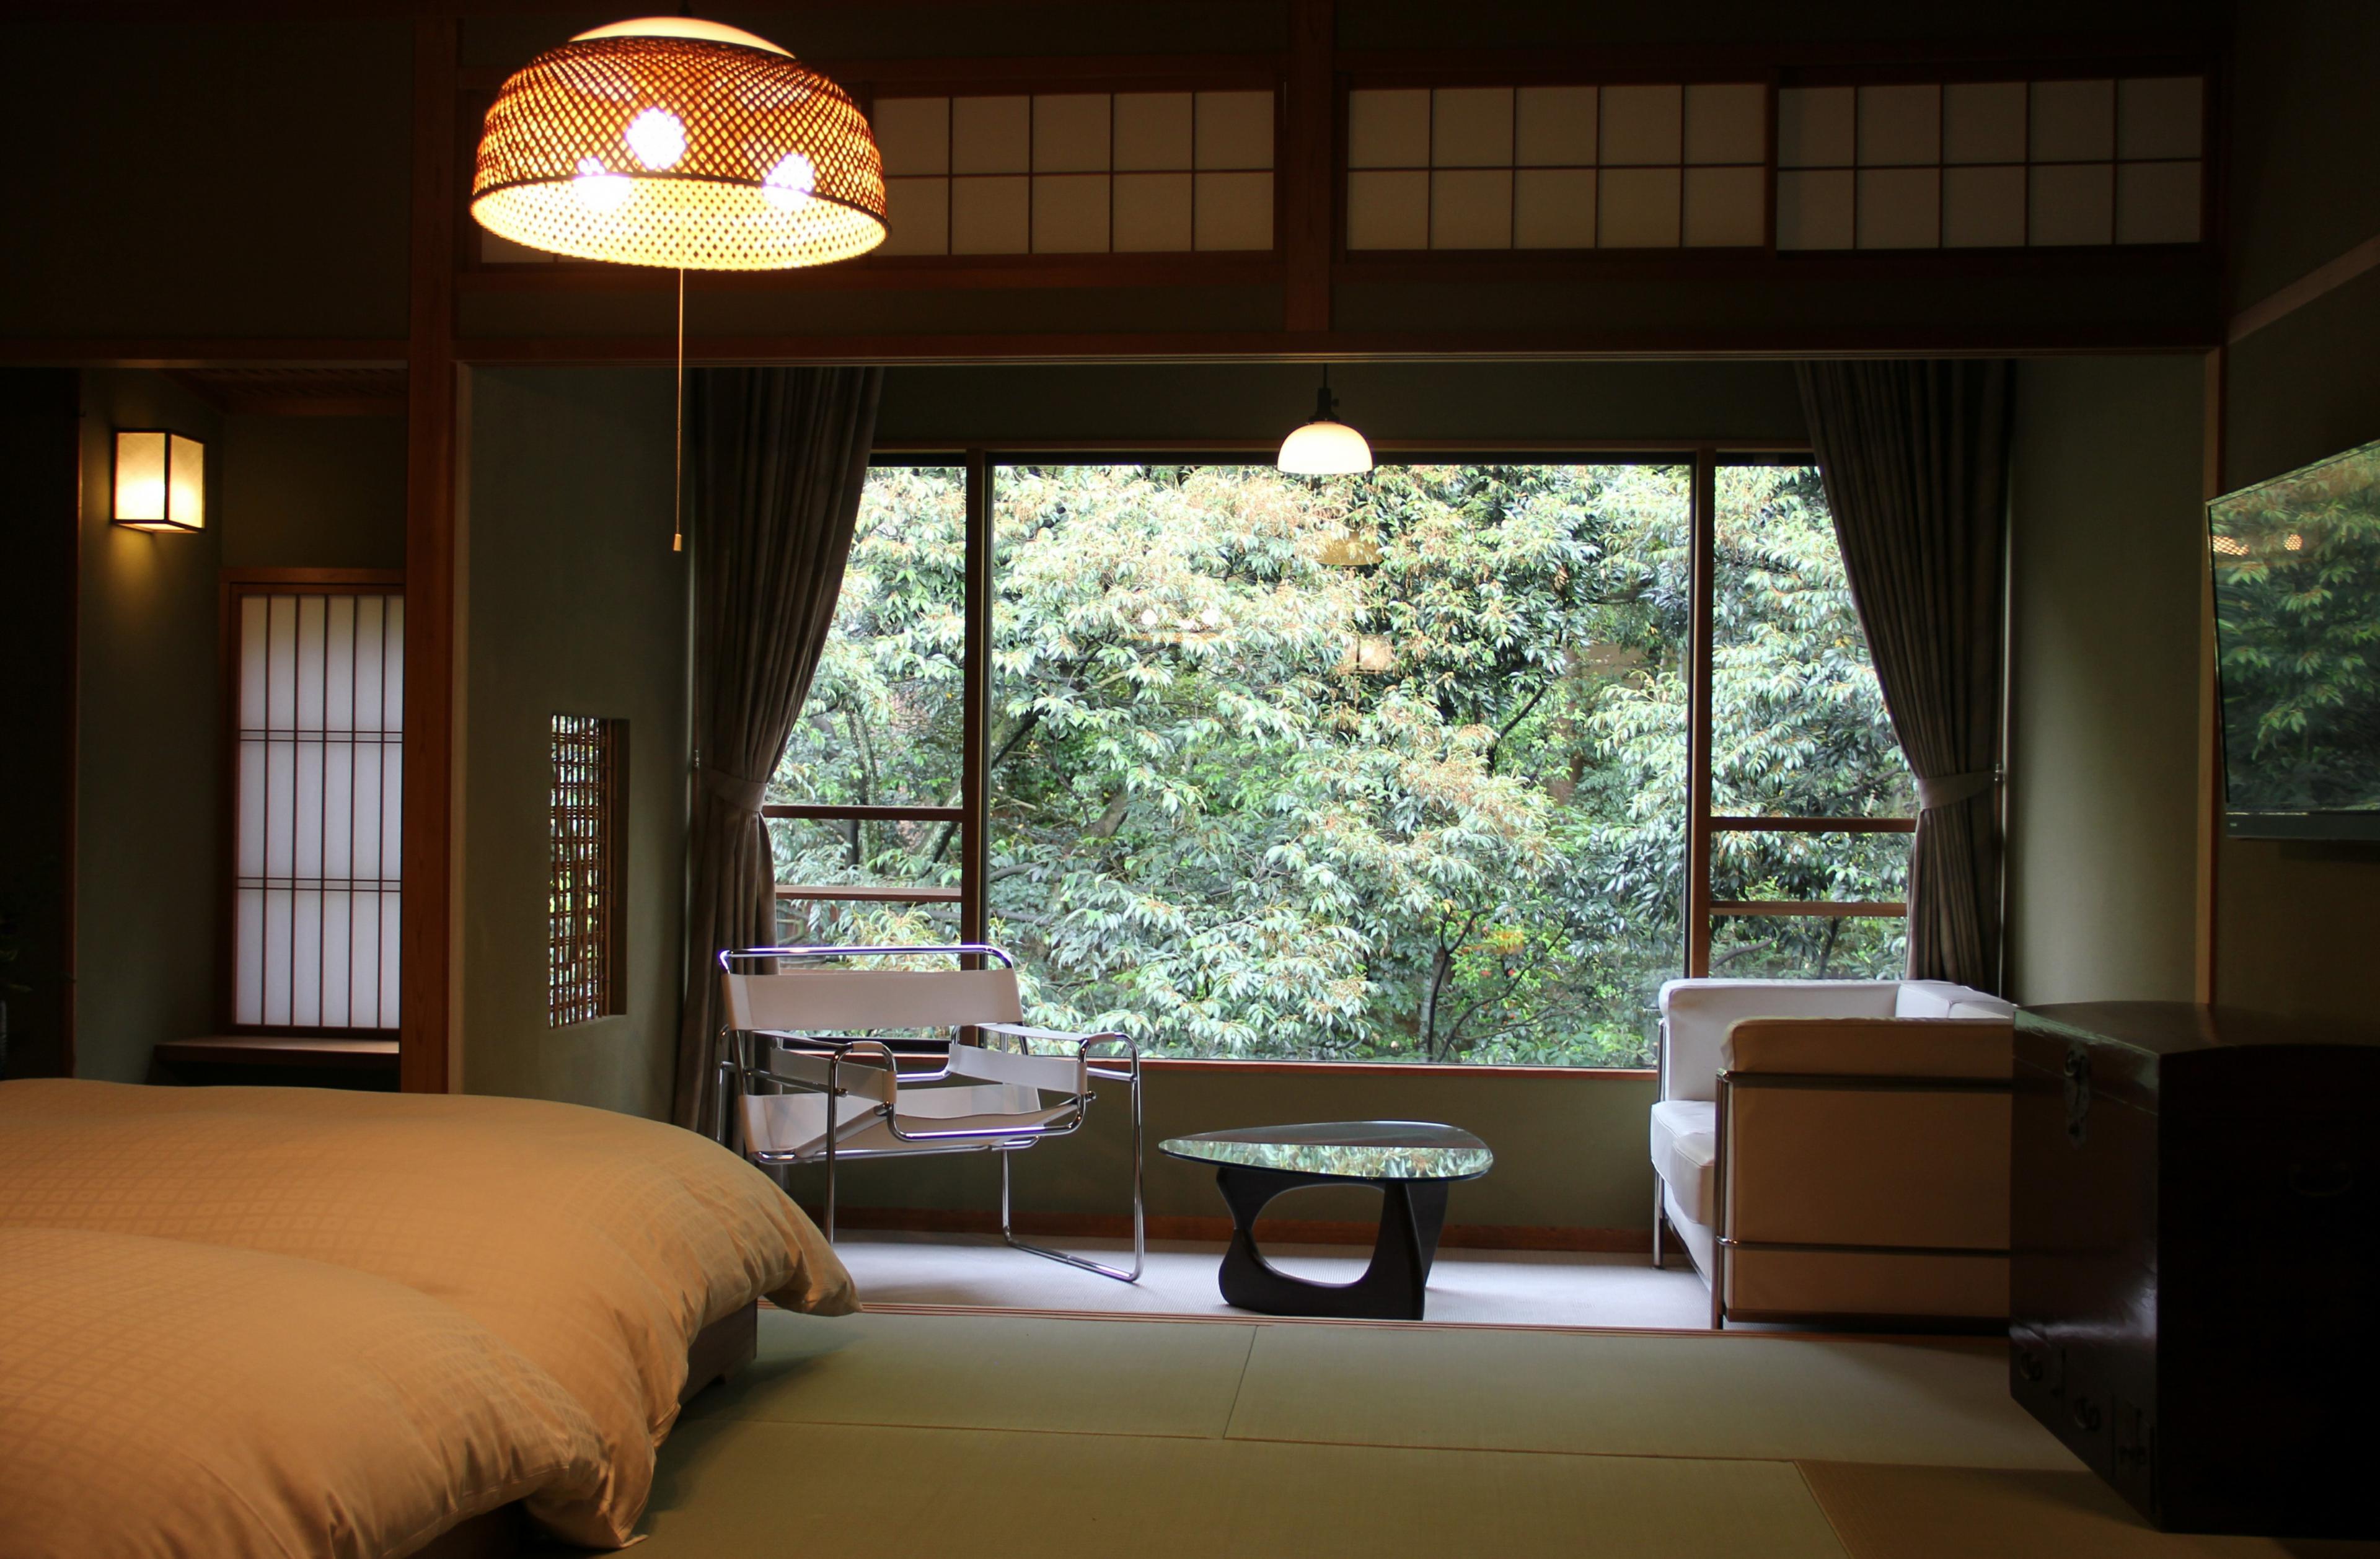 japanese style bedroom with big windows looking out on greenery